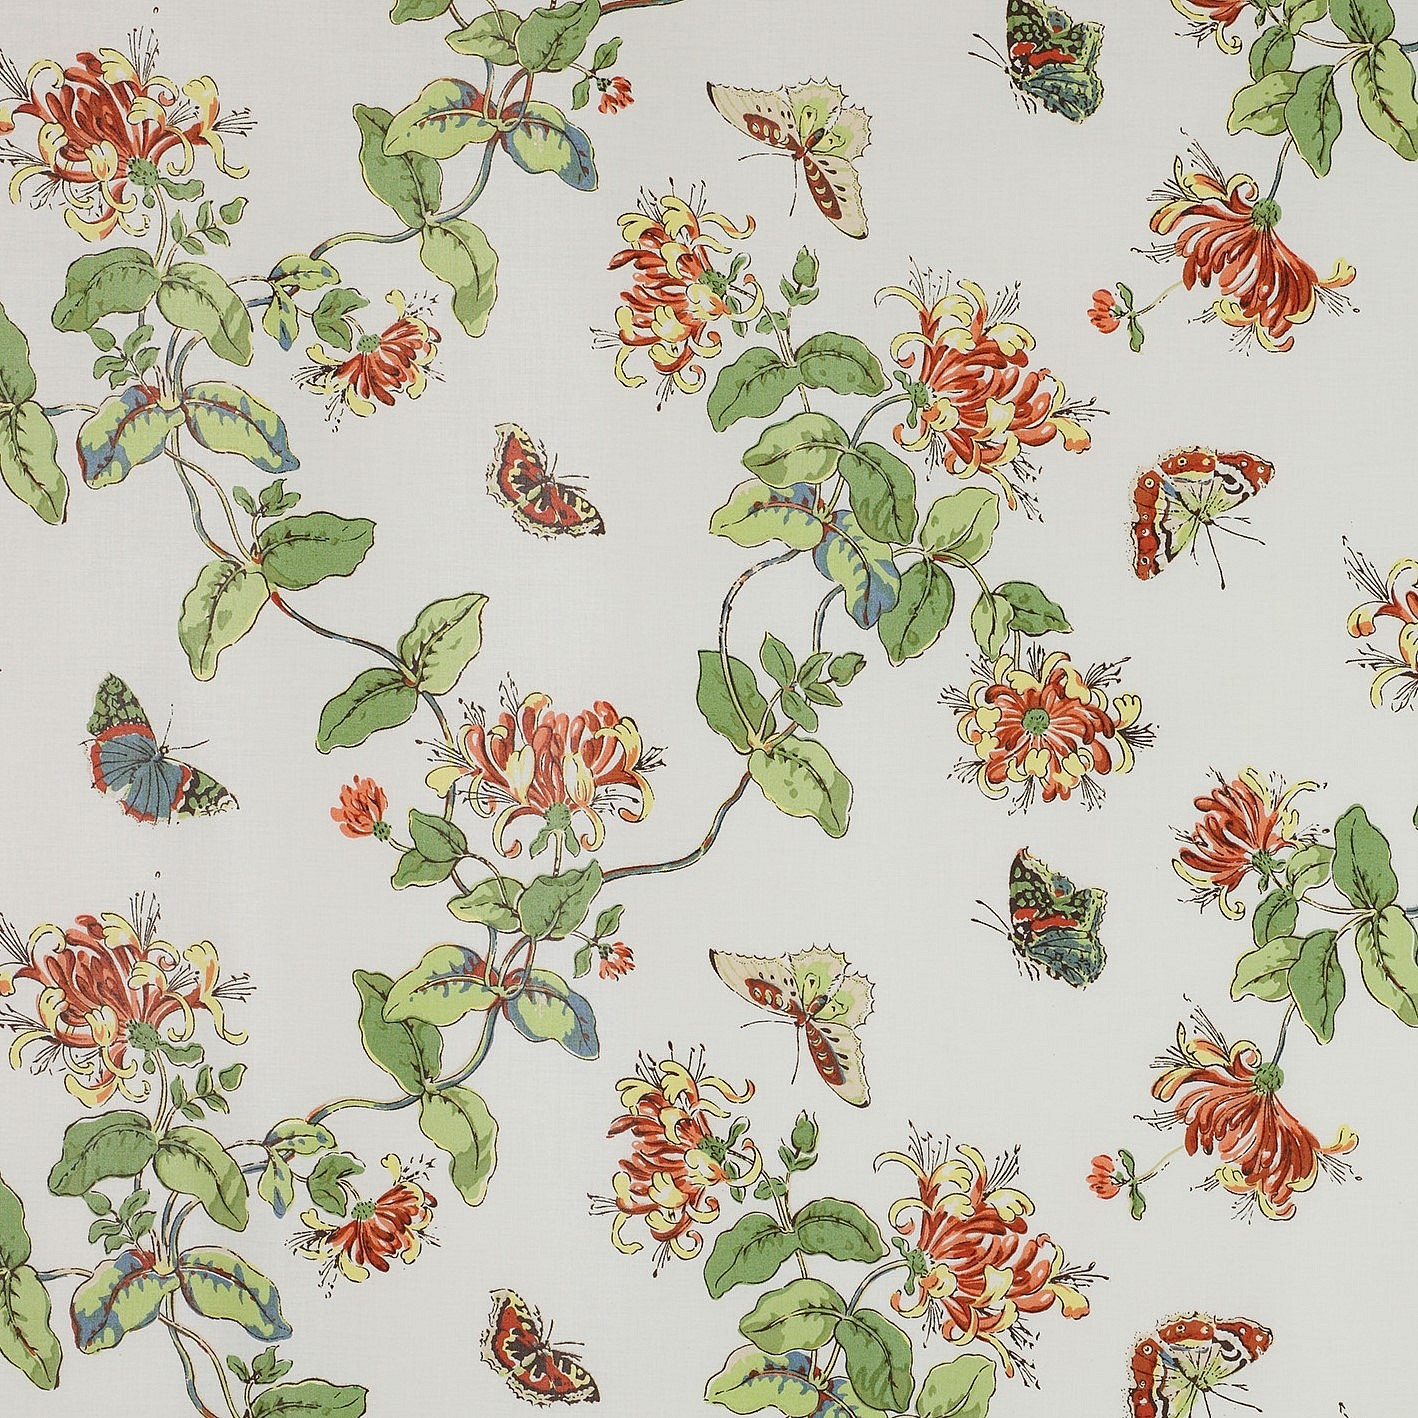 Honeysuckle fabric, Colefax and Fowler